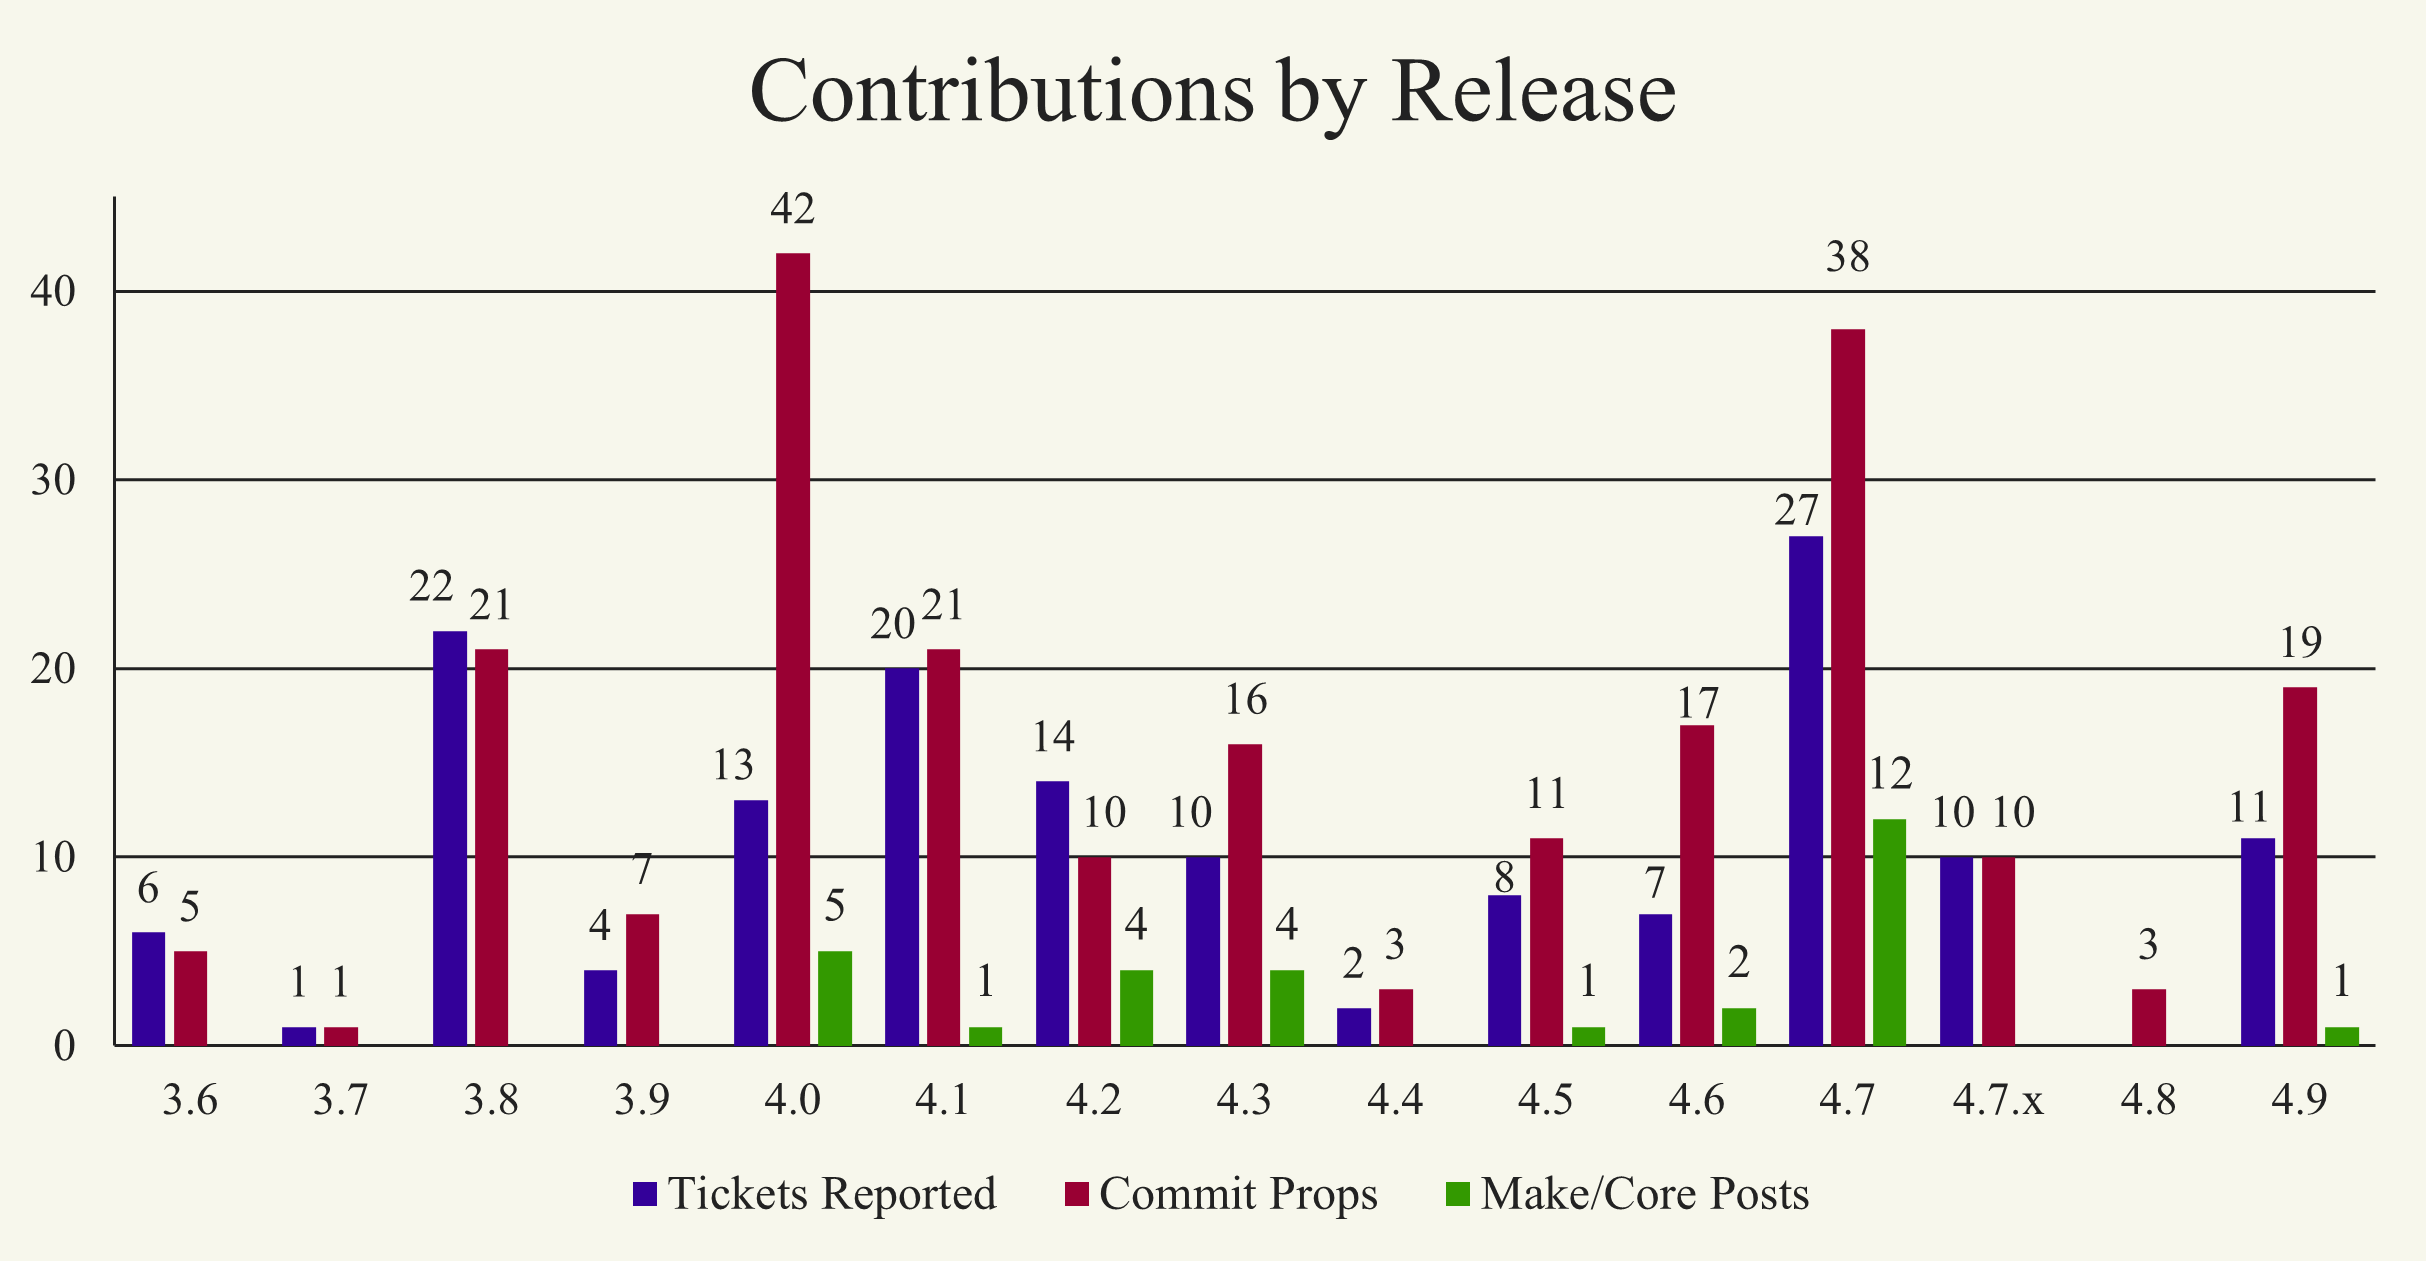 Bar chart showing number of trac tickets created (between 0 and 27), core commit props (between 1 and 42), and Make/Core blog posts (between 0 and 12) for each WordPress version from 3.6 through 4.9. 